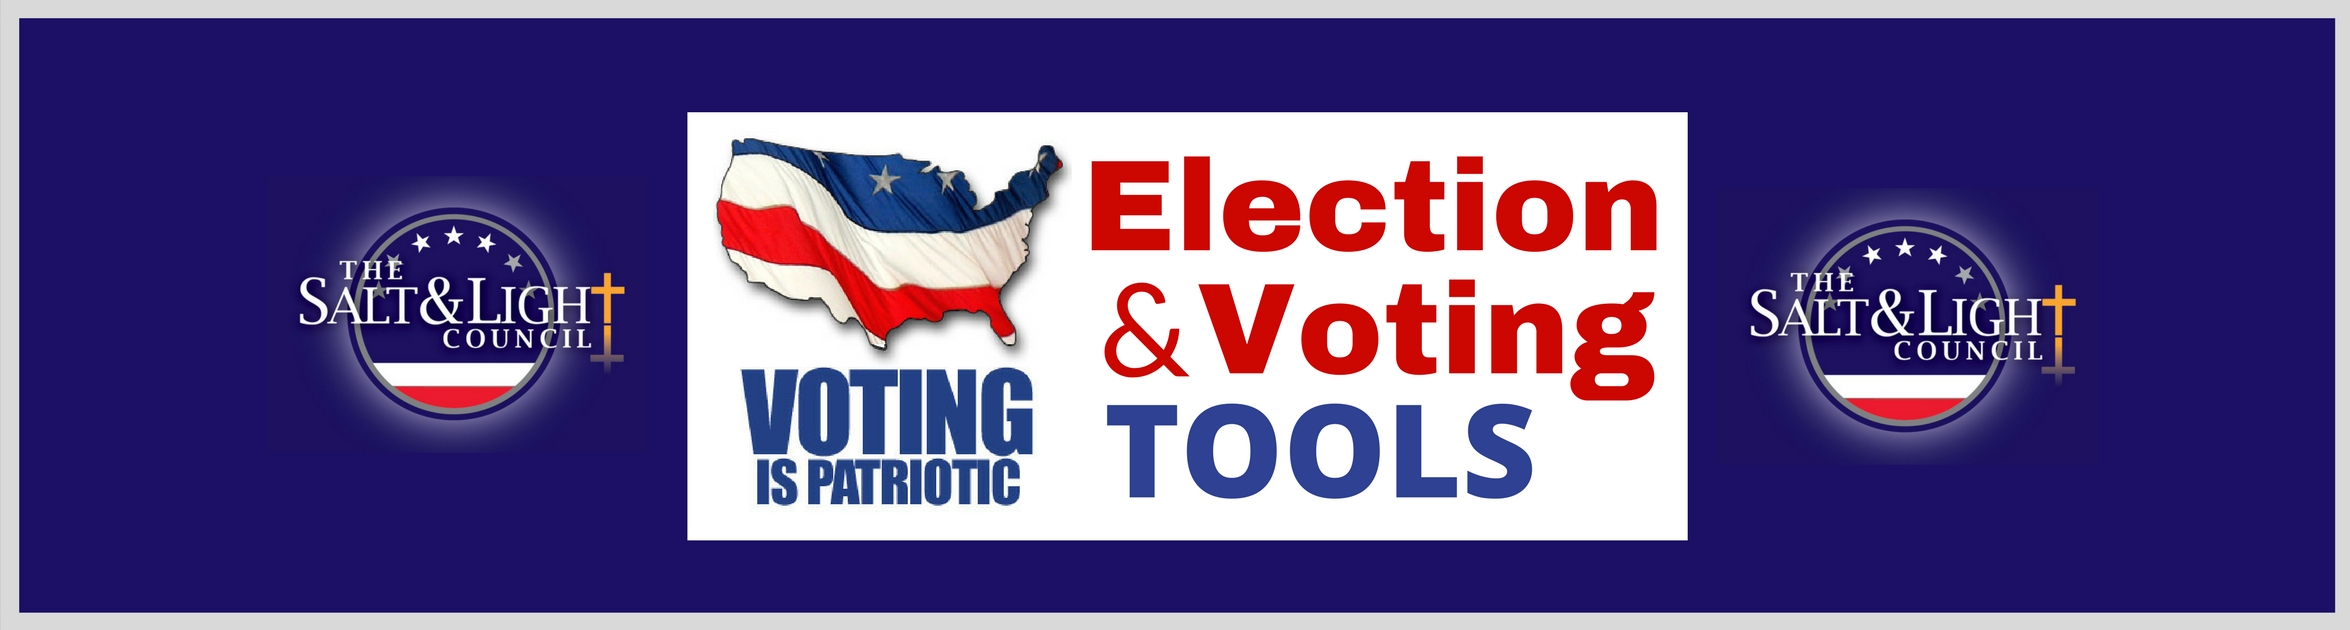 2018 SSC Election & Voting Tools.png